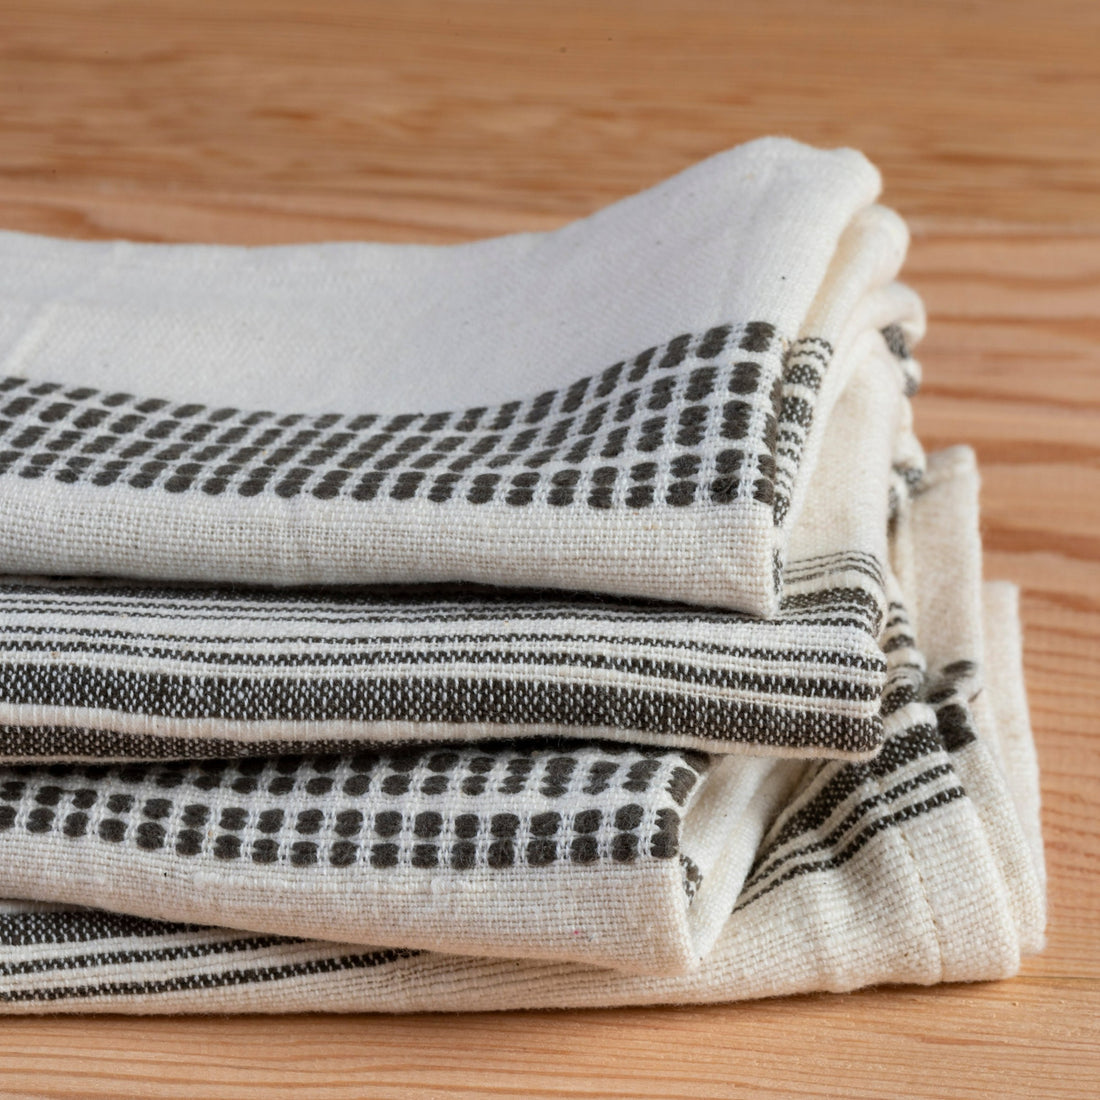 Aden Napkins, Natural with Grey, Set of 4